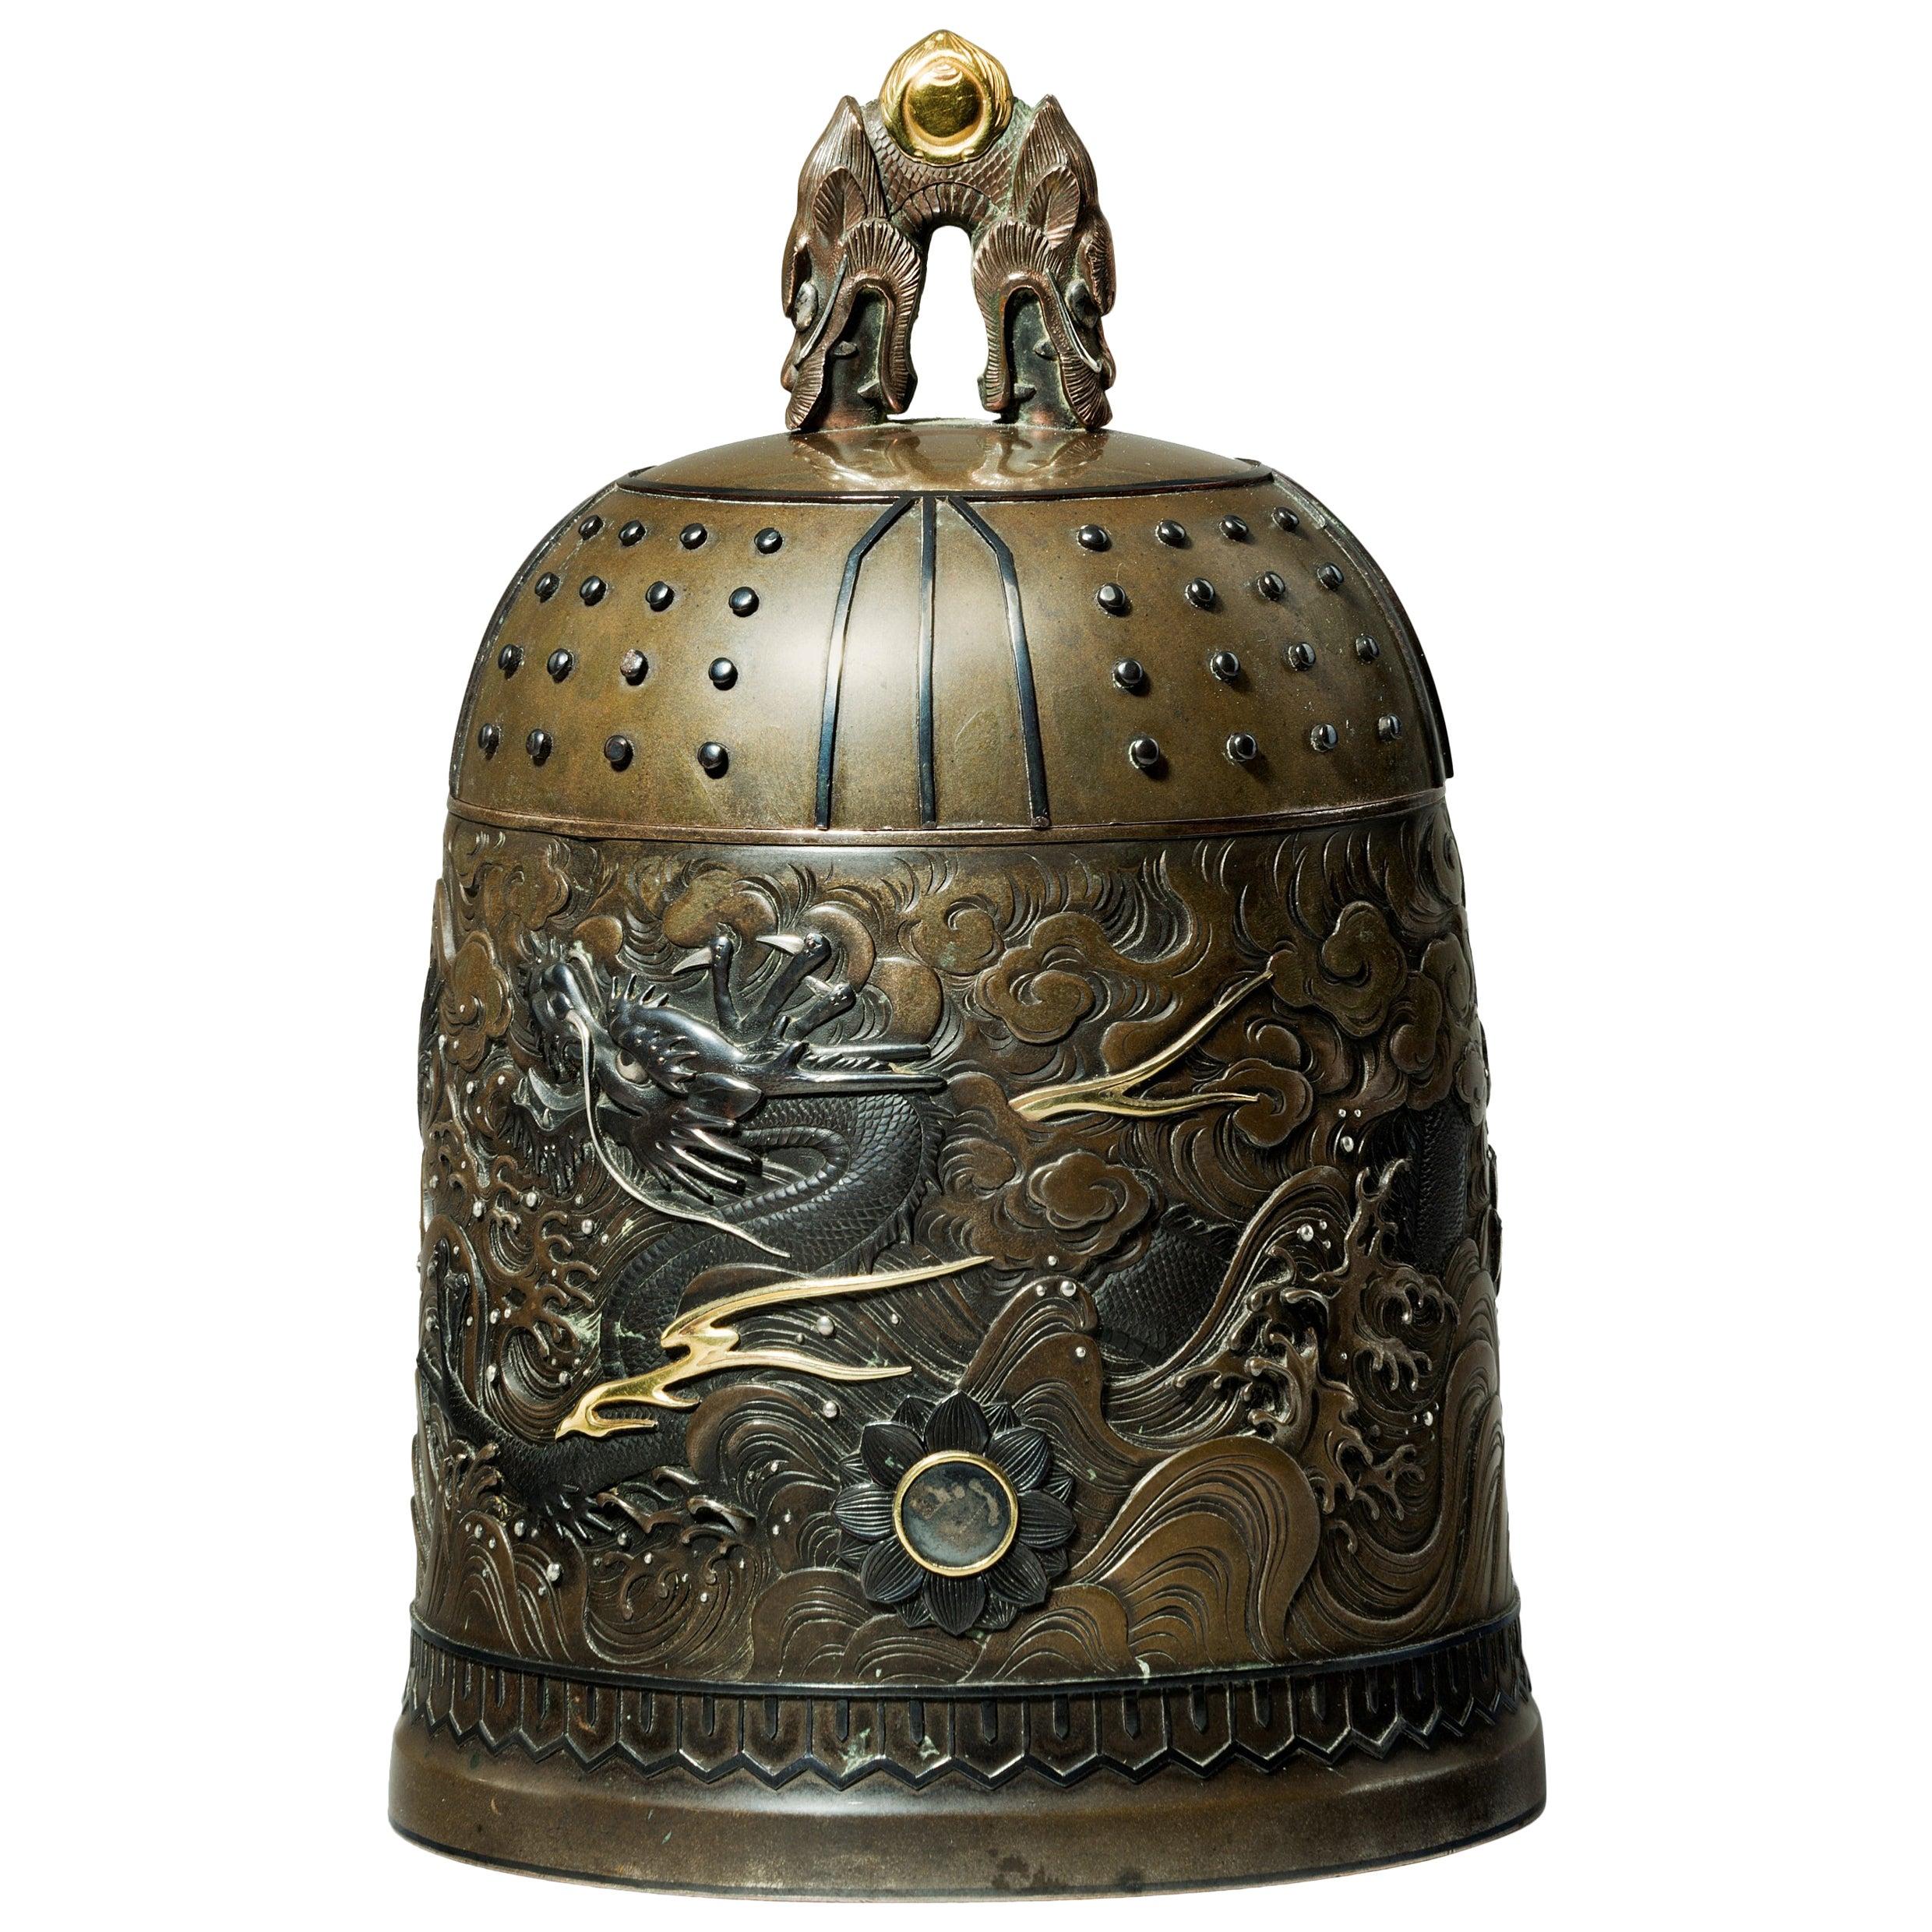 Outstanding Meiji Period Mixed Metal Bell Casket by the Nogowa Foundary For Sale